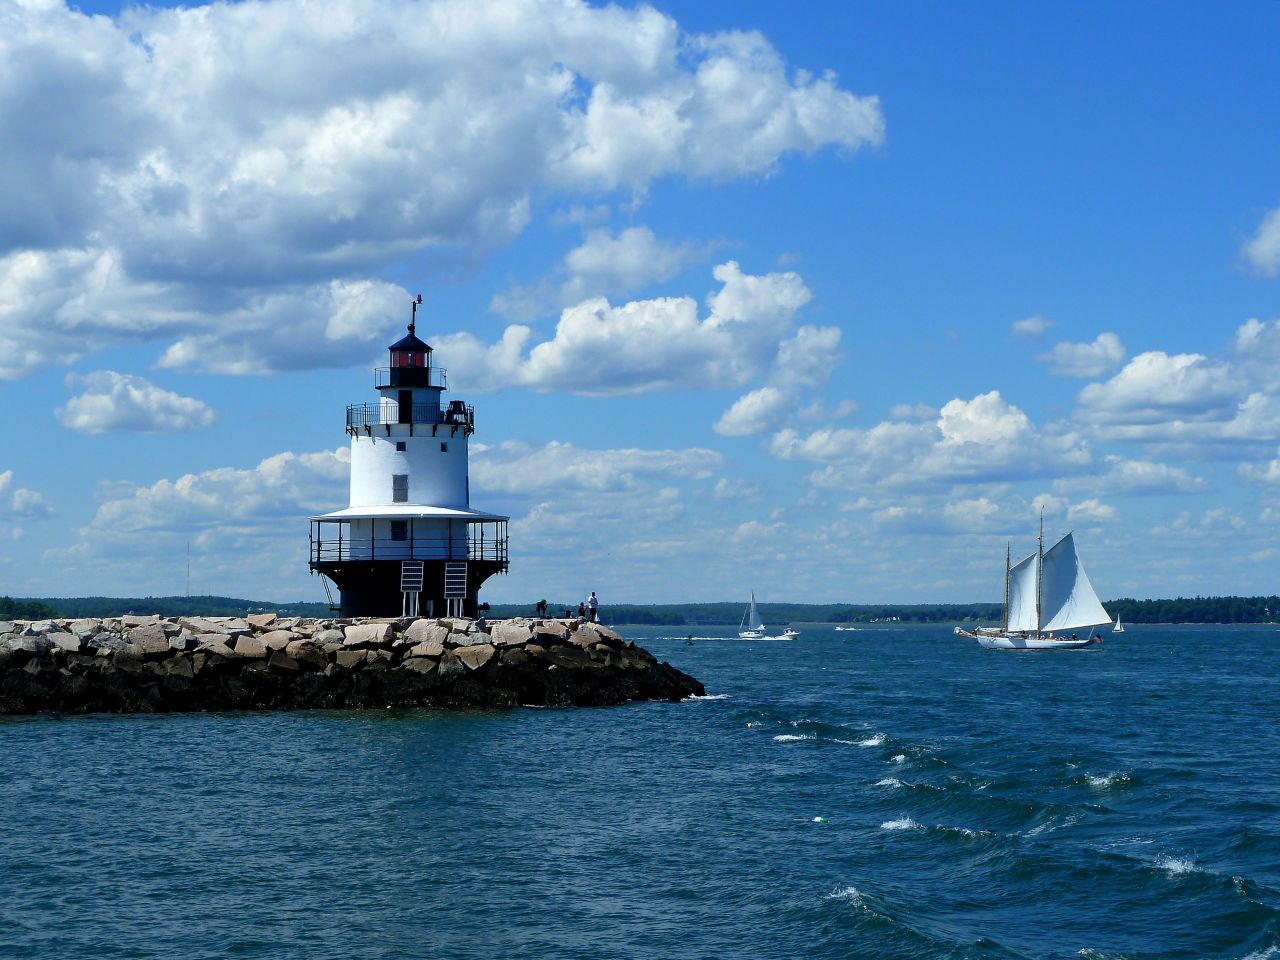 This lighthouse is smaller than most, and it captured <a href="http://ireport.cnn.com/docs/DOC-1157099">Mary Umbricht's</a> attention while visiting Portland, Maine. She is proud of the results: "It was the combination of the clouds, blue sky, the sailboat and how they all came together that I liked about this photo."